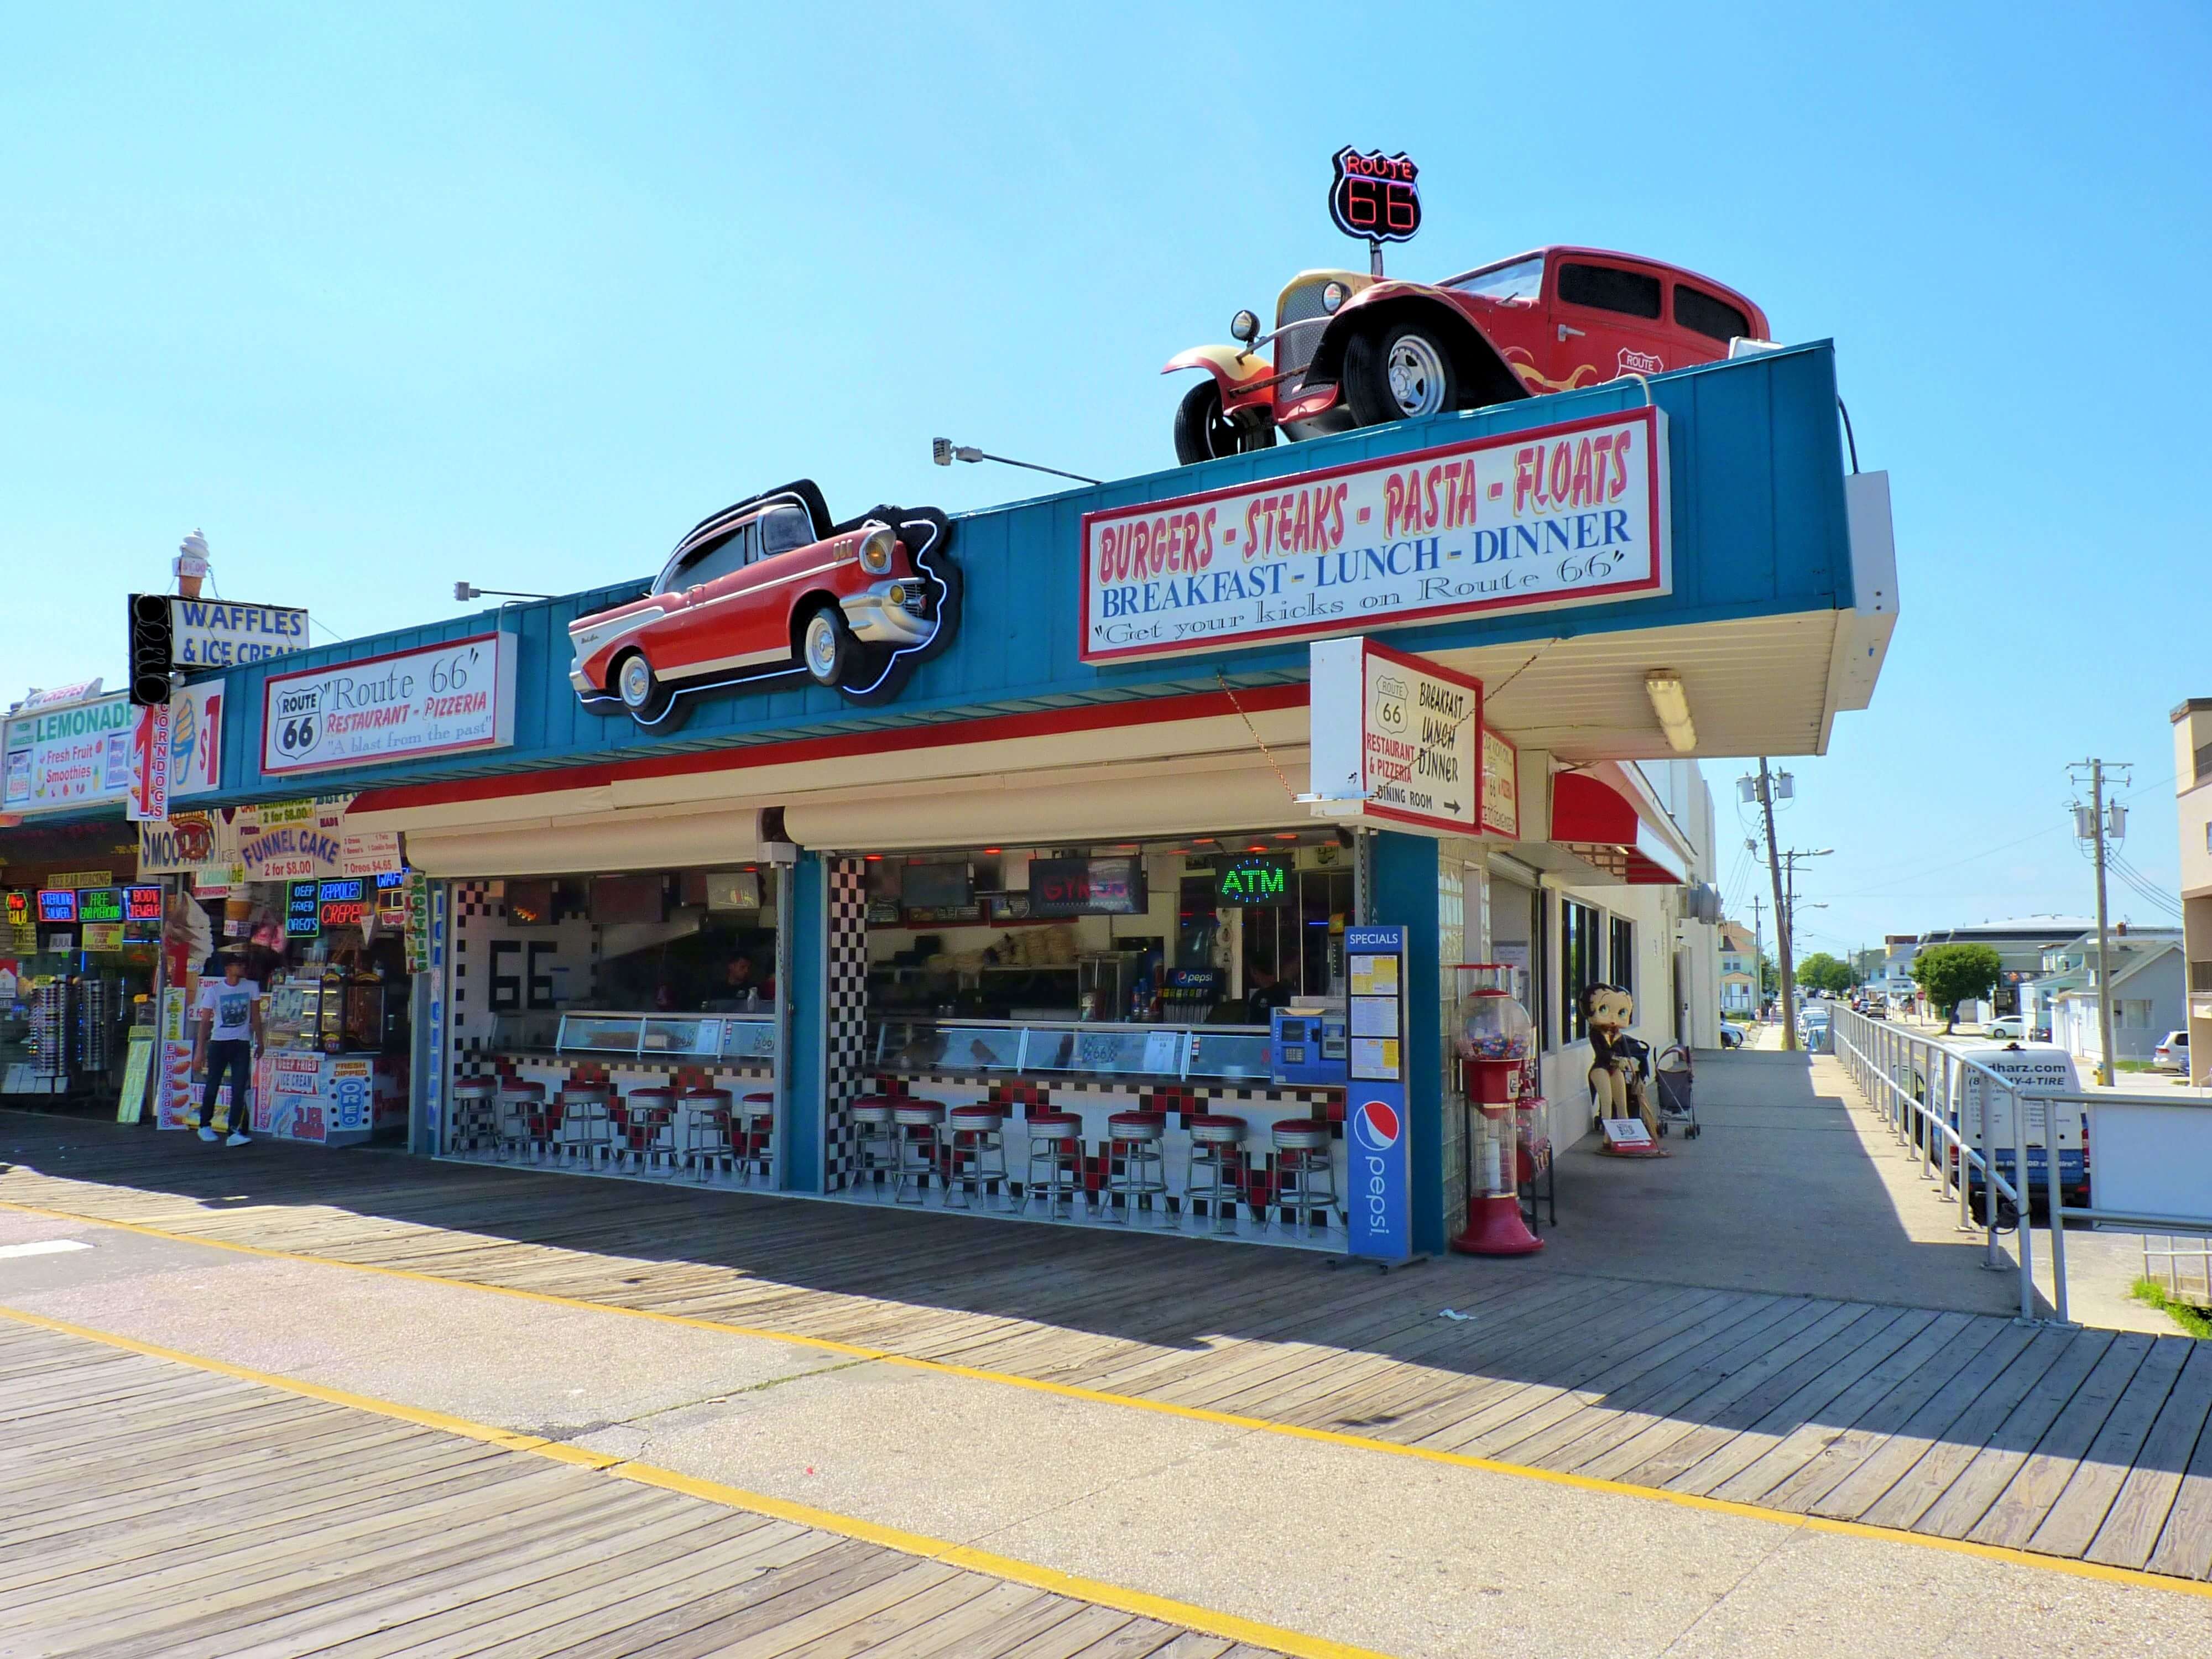 Route 66 Celebrates 10 Years on the Wildwoods Boardwalk